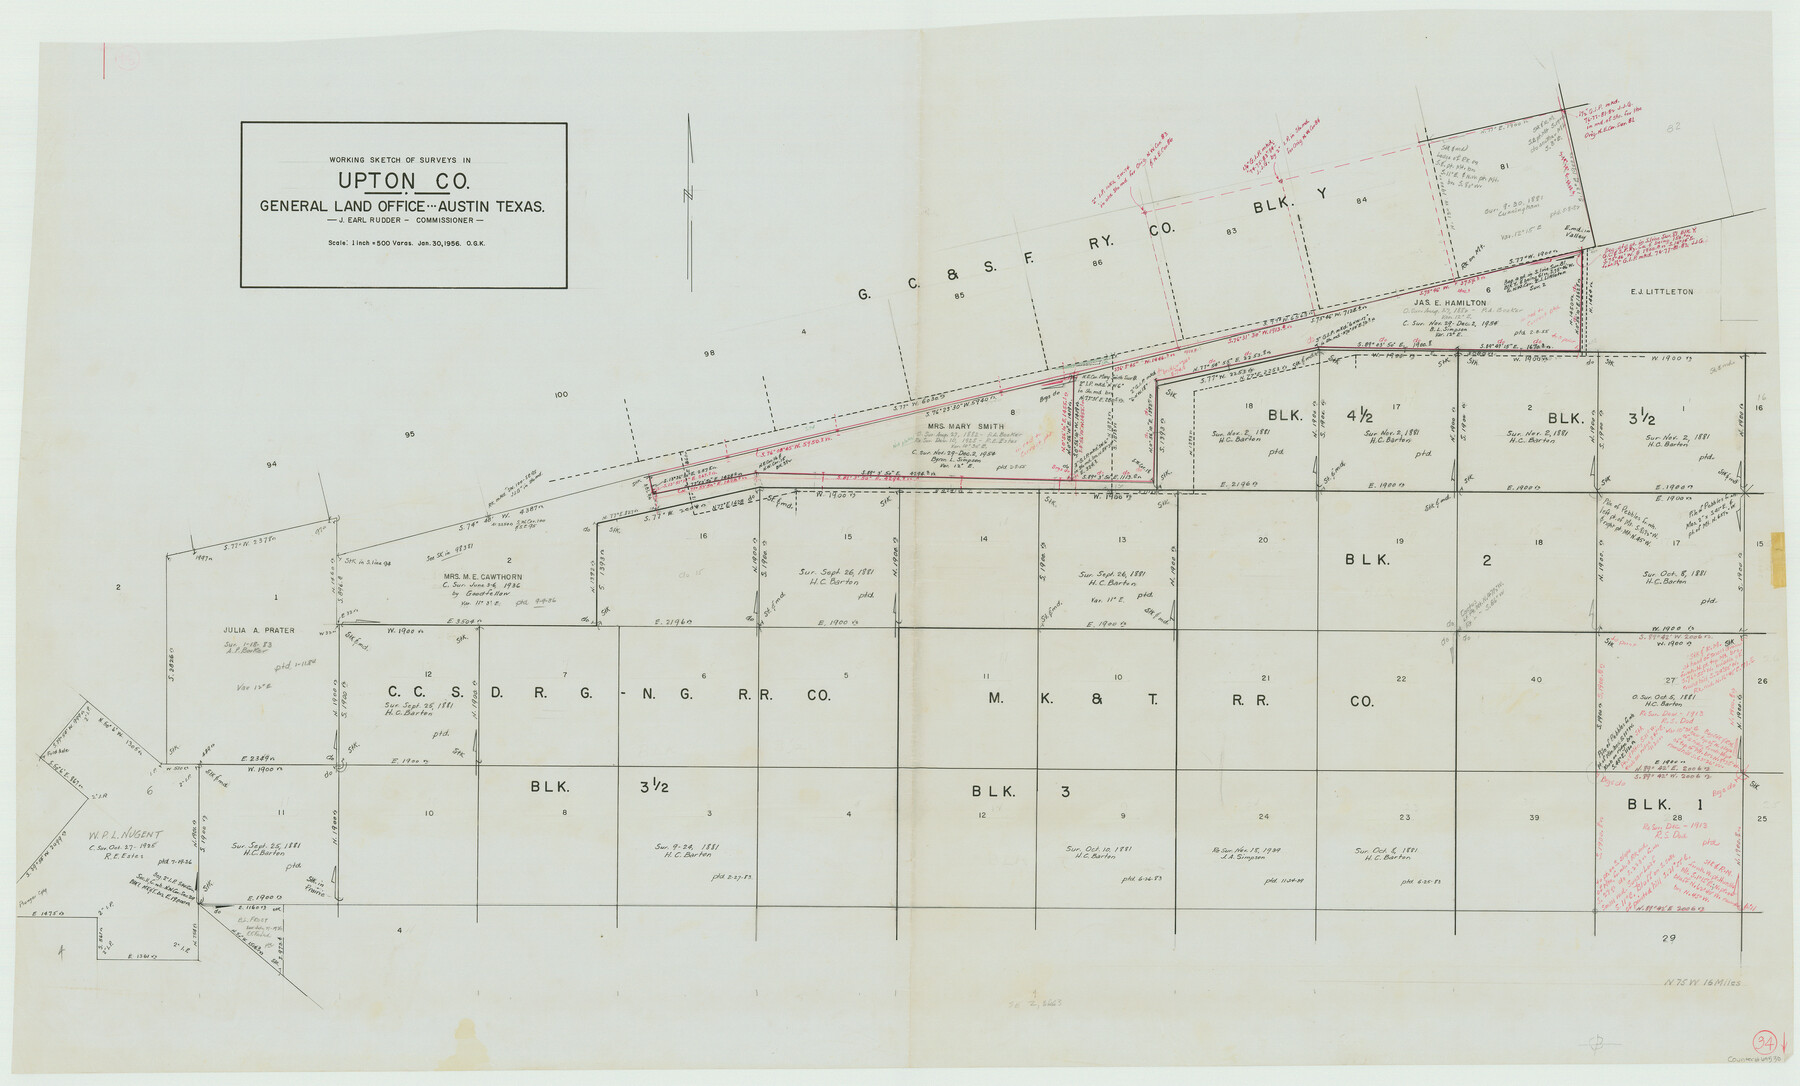 69530, Upton County Working Sketch 34, General Map Collection